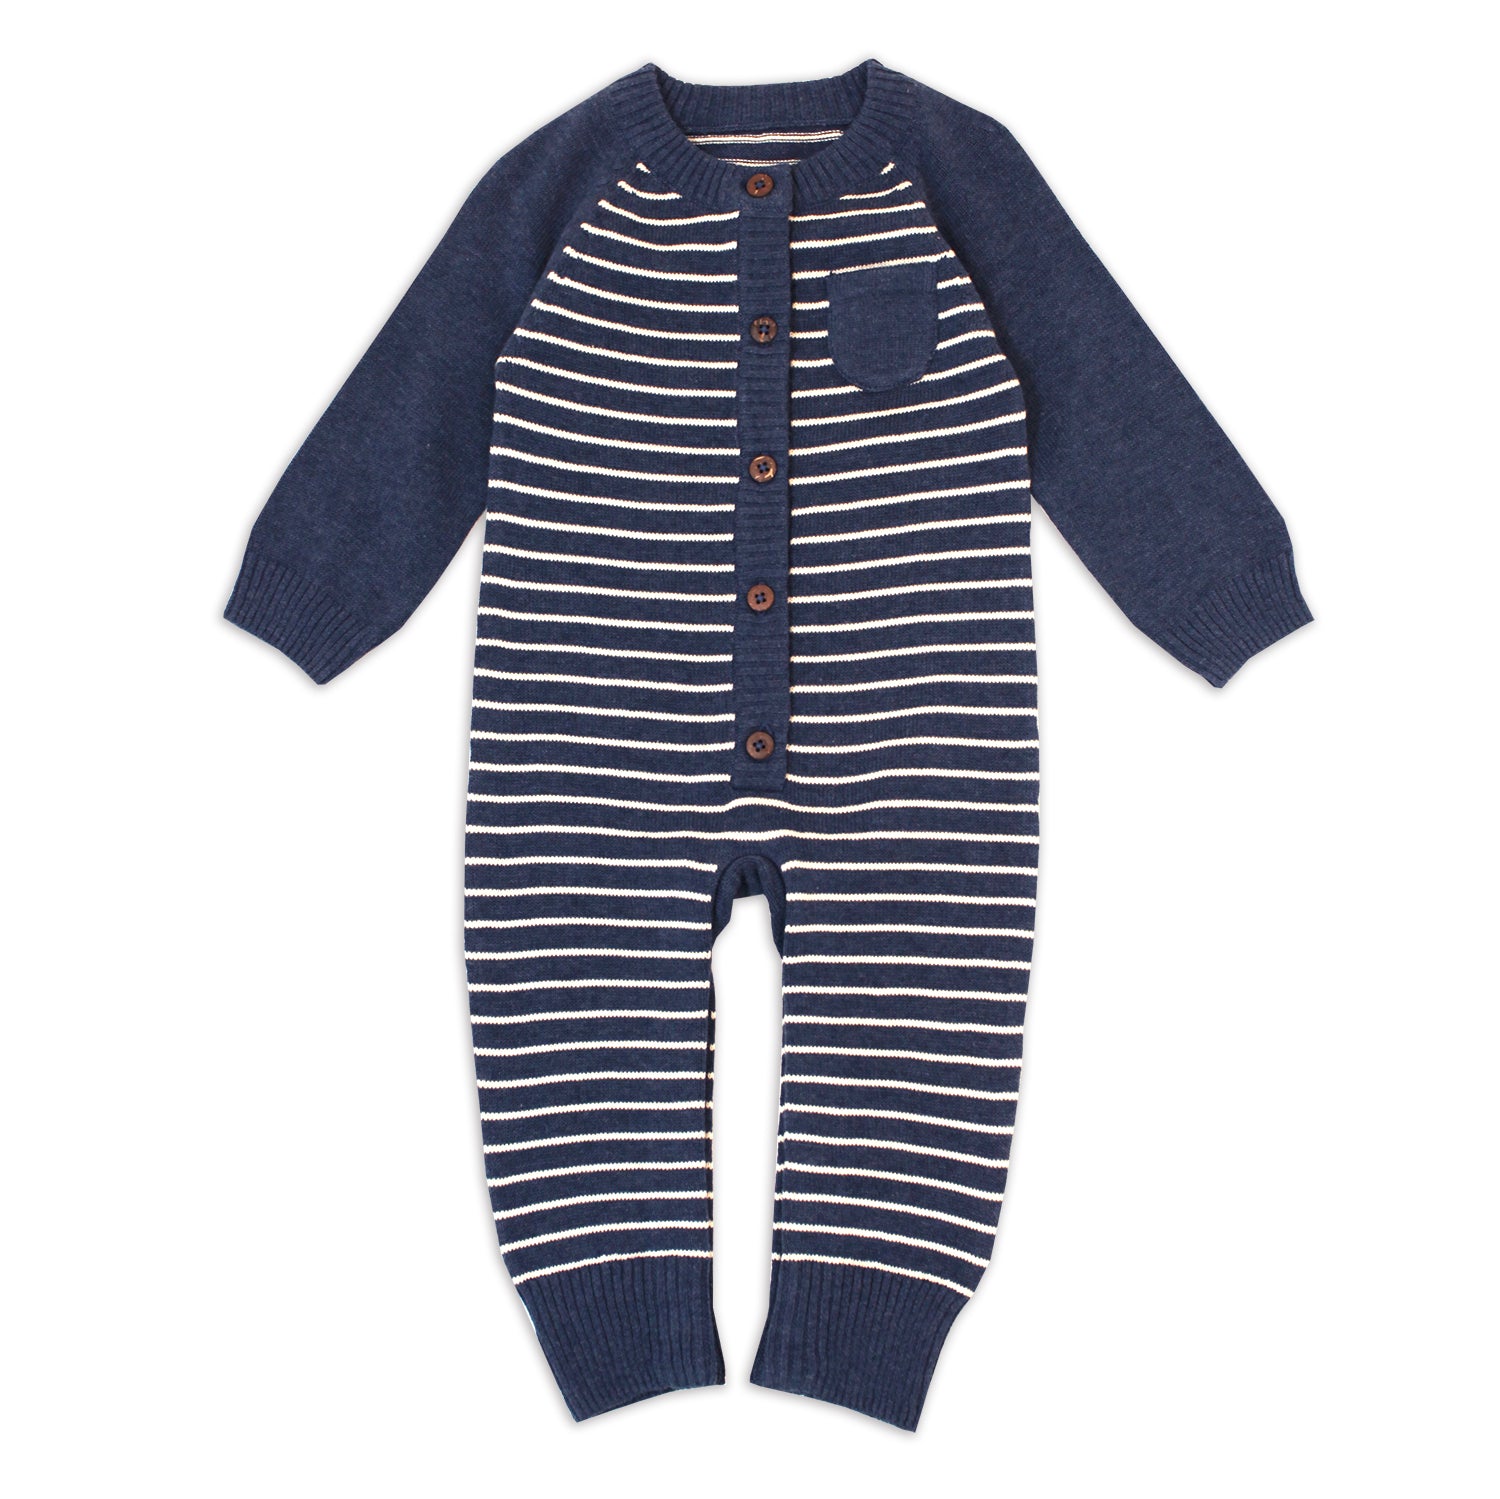 Milan Heather Knit Collection for Babies